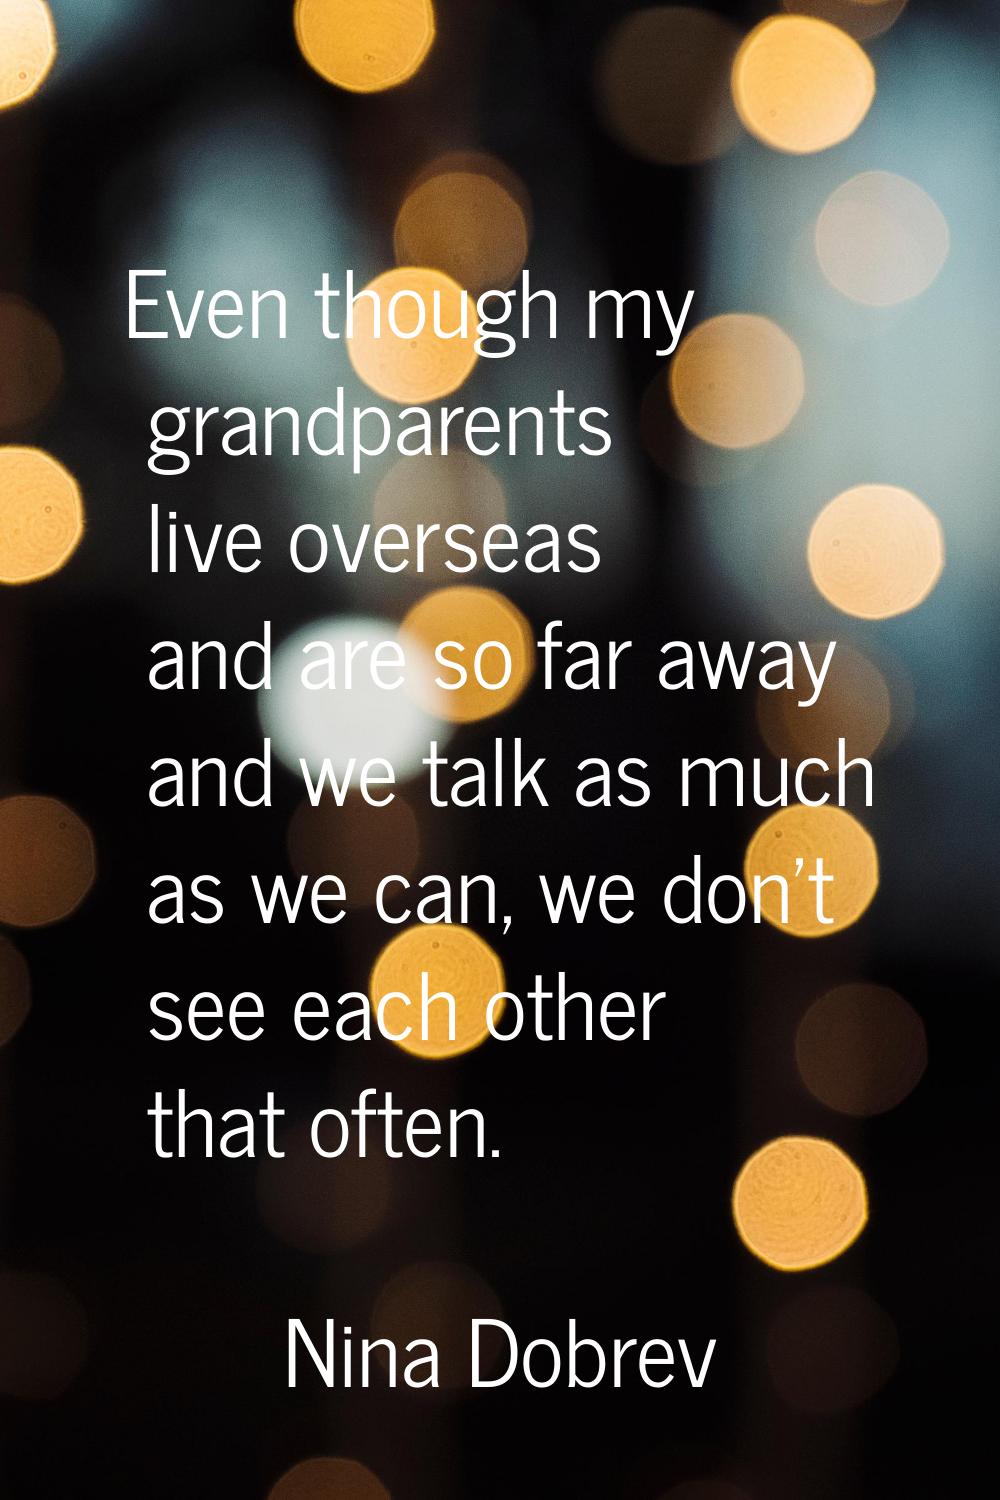 Even though my grandparents live overseas and are so far away and we talk as much as we can, we don